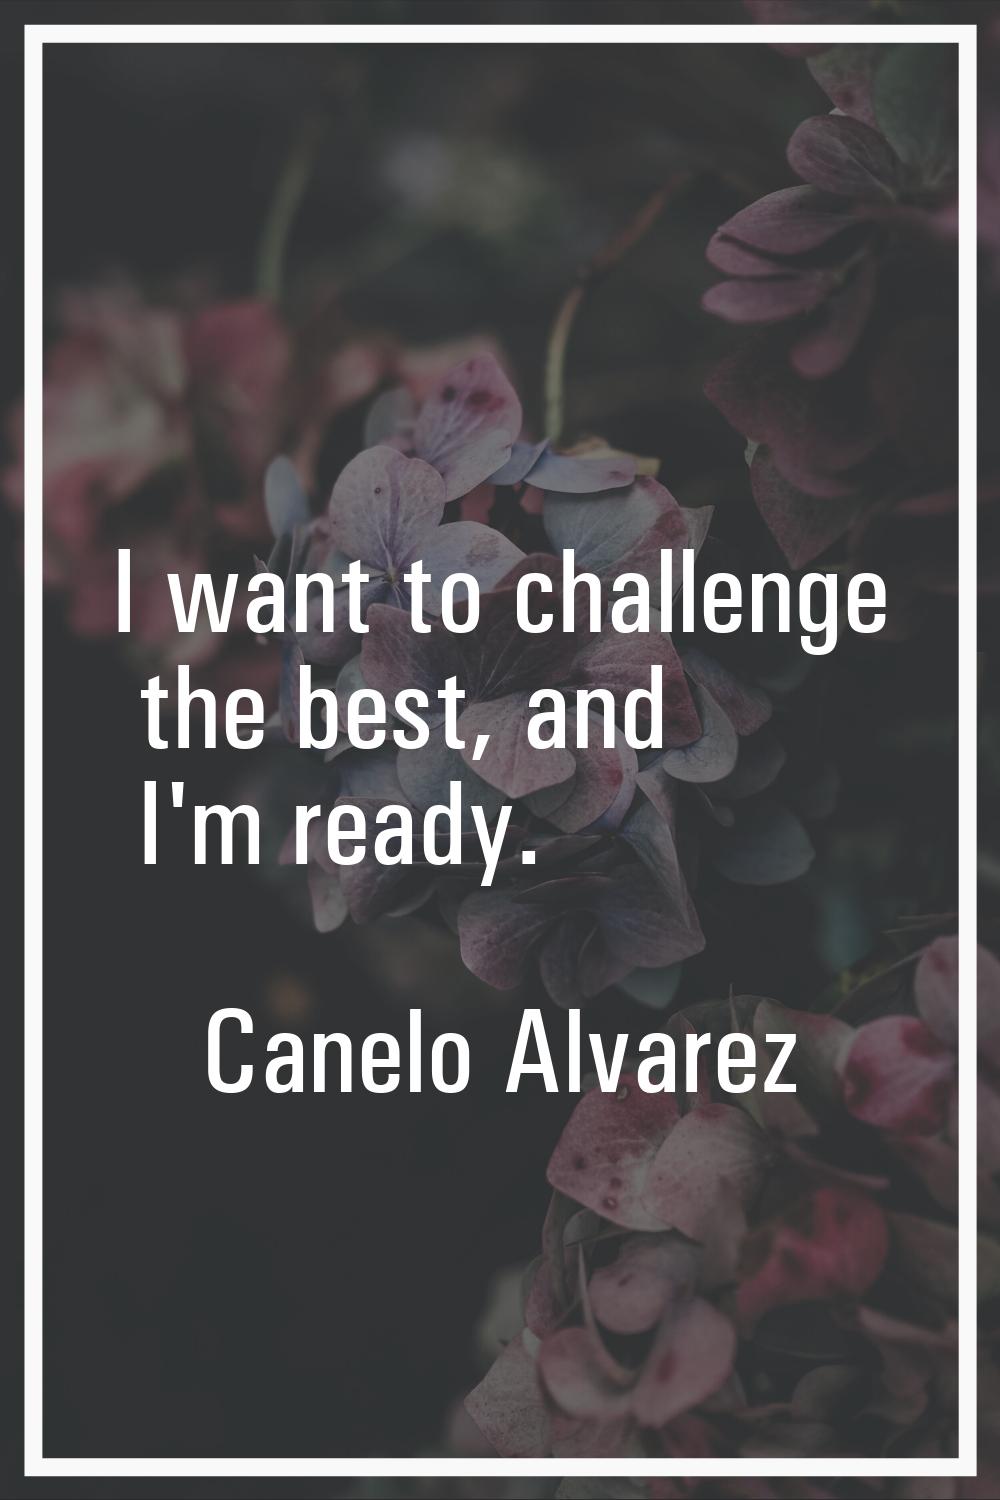 I want to challenge the best, and I'm ready.